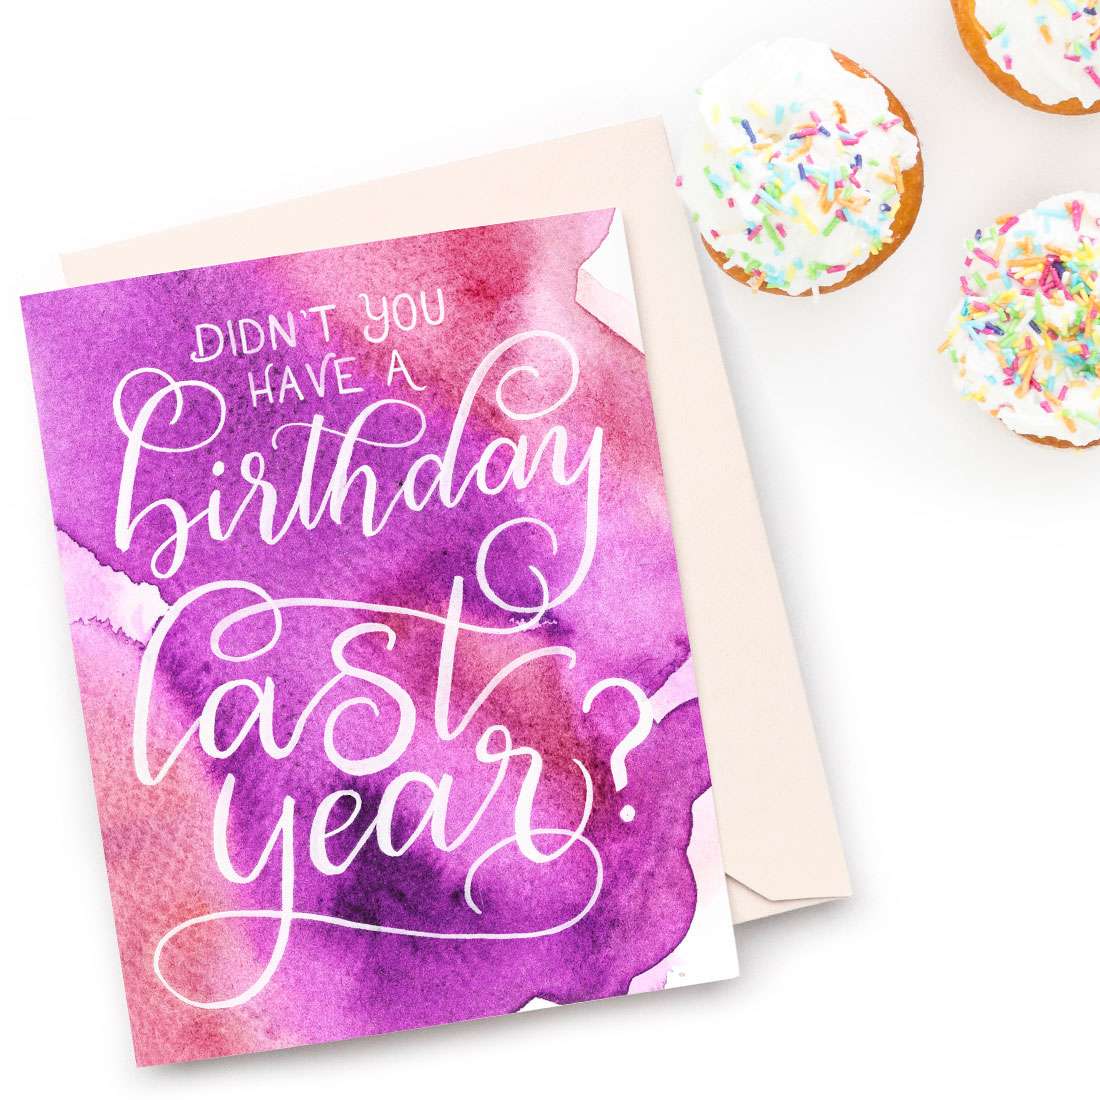 Image of a hand-lettered watercolor card saying "Didn't you have a birthday last year?" by CharmCat | charmcat.net